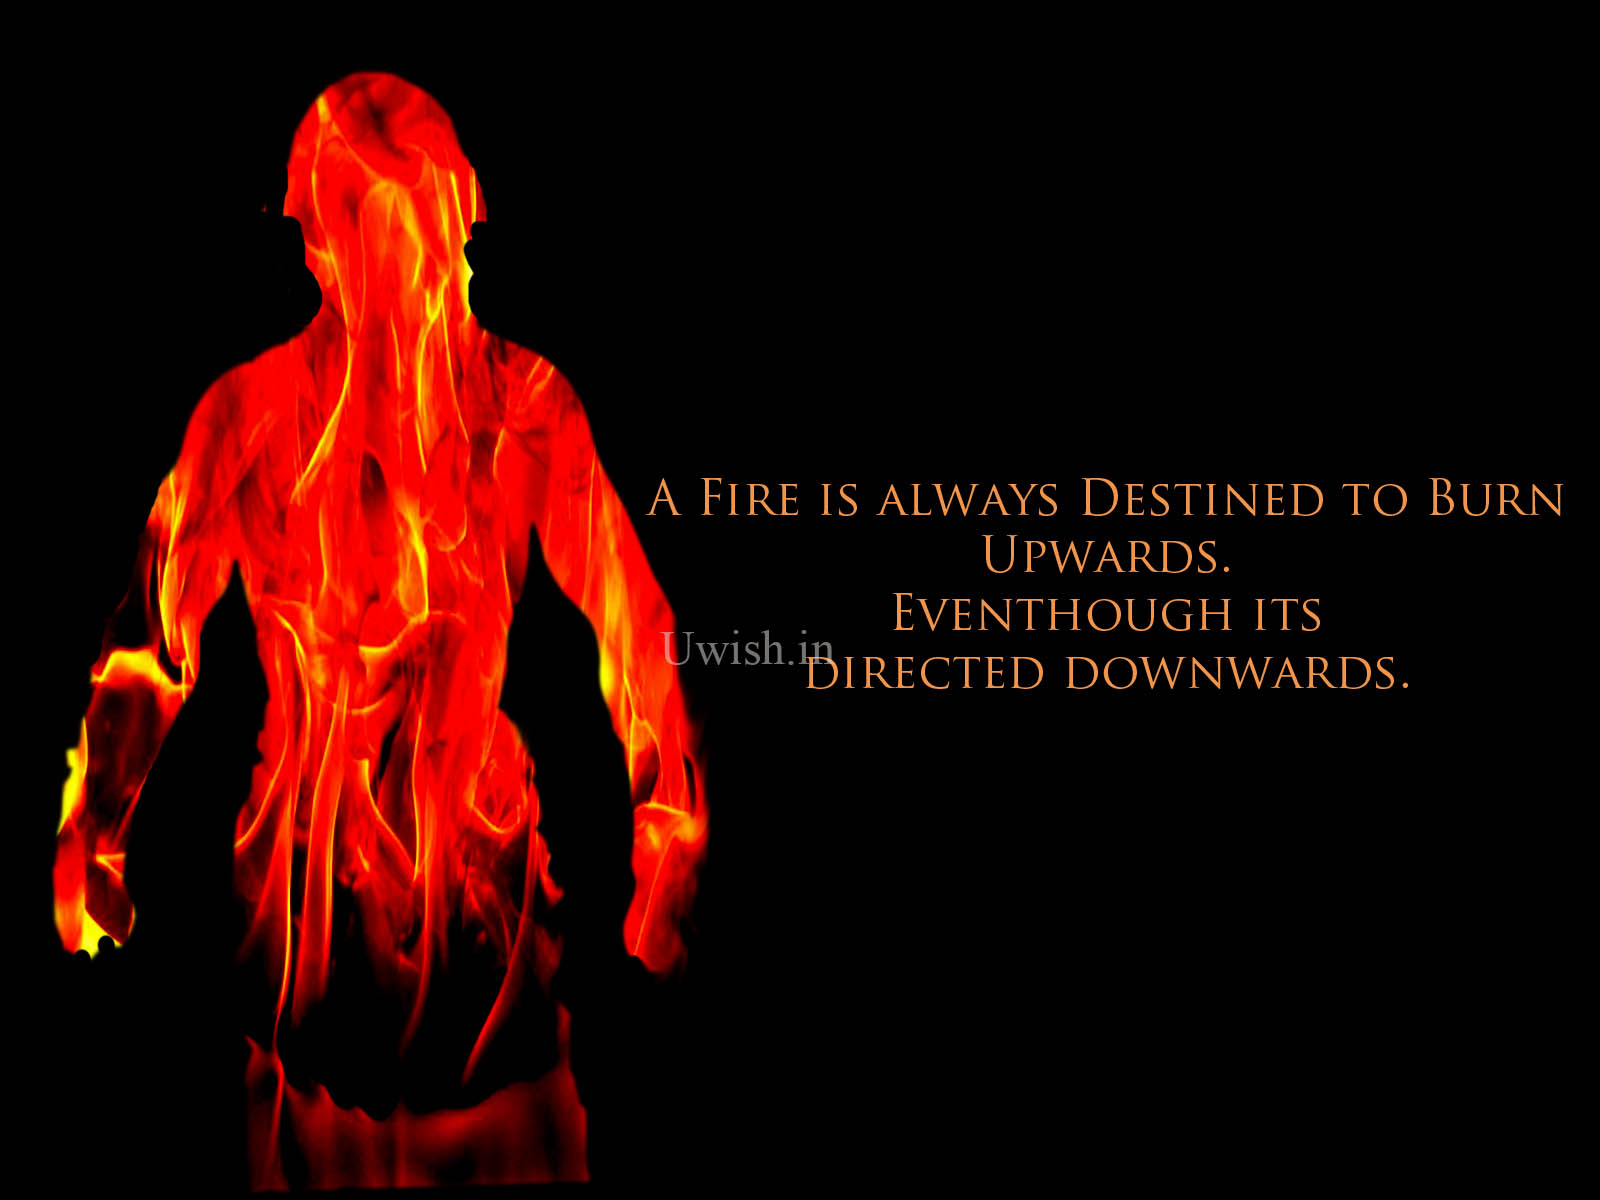 A Fire is always destined to burn upwards. Eventhough its, directed downwards. Fire man with inspiring quote